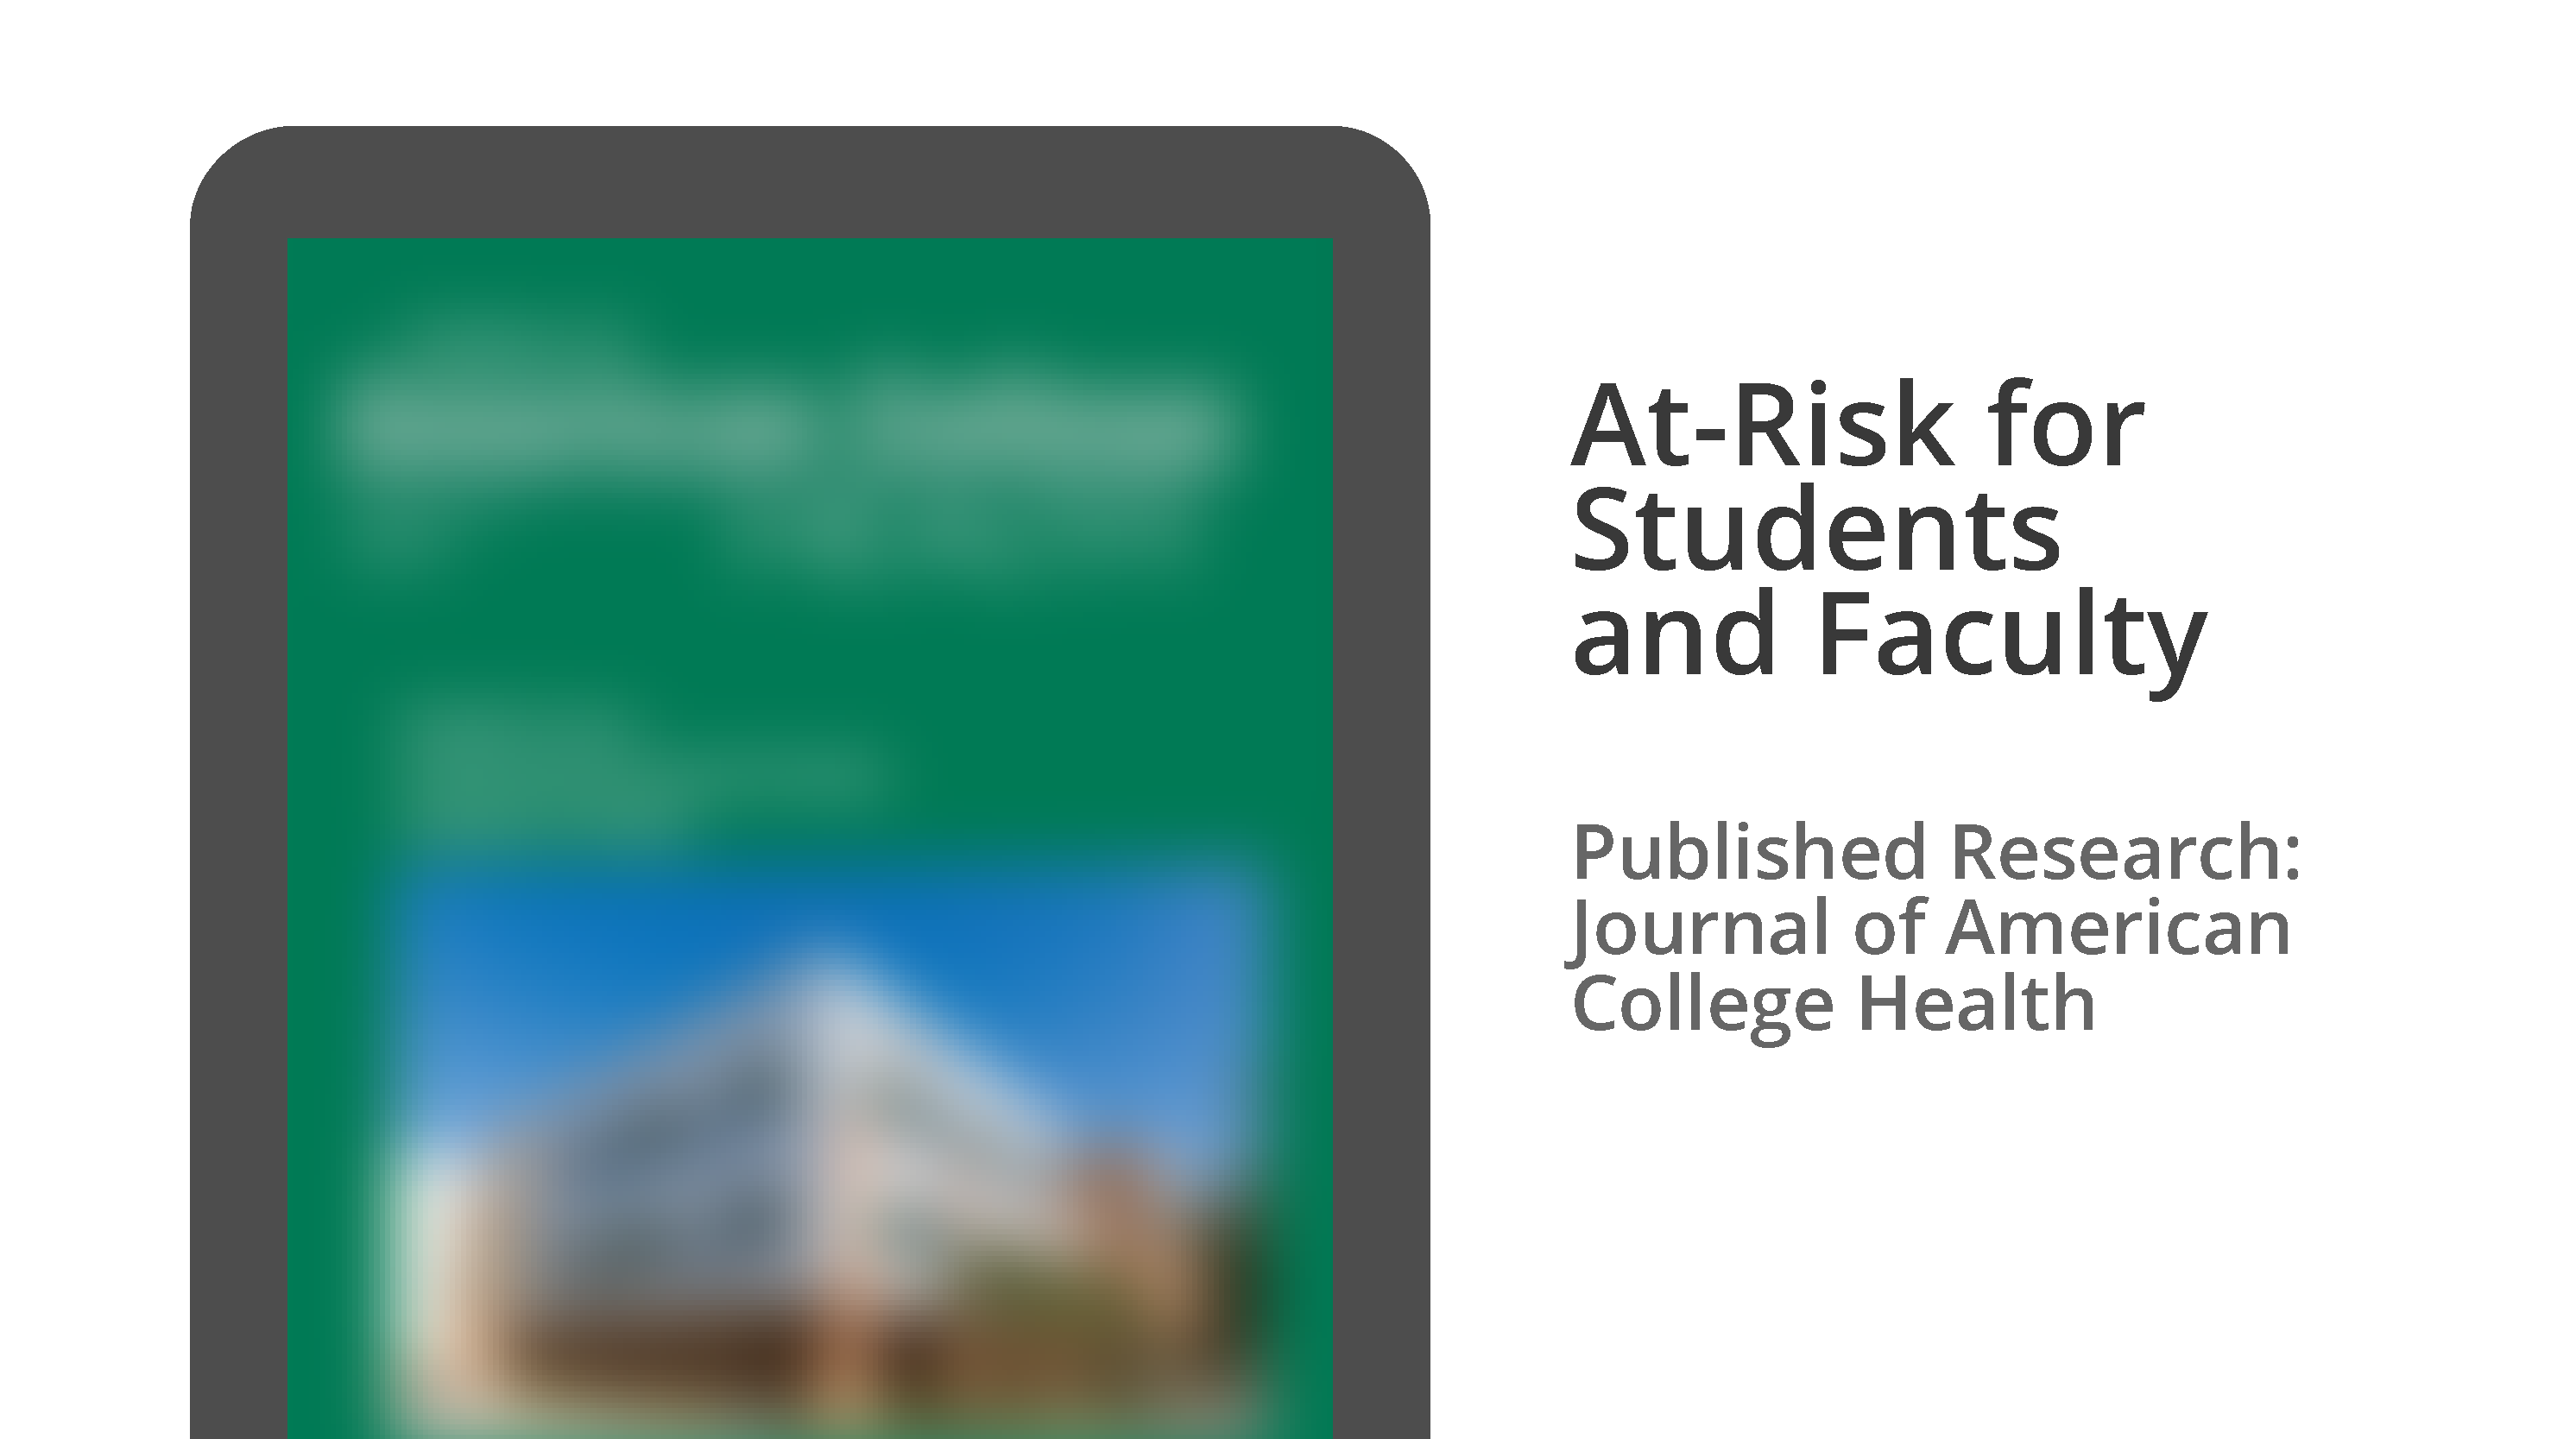 At-Risk for Students and Faculty